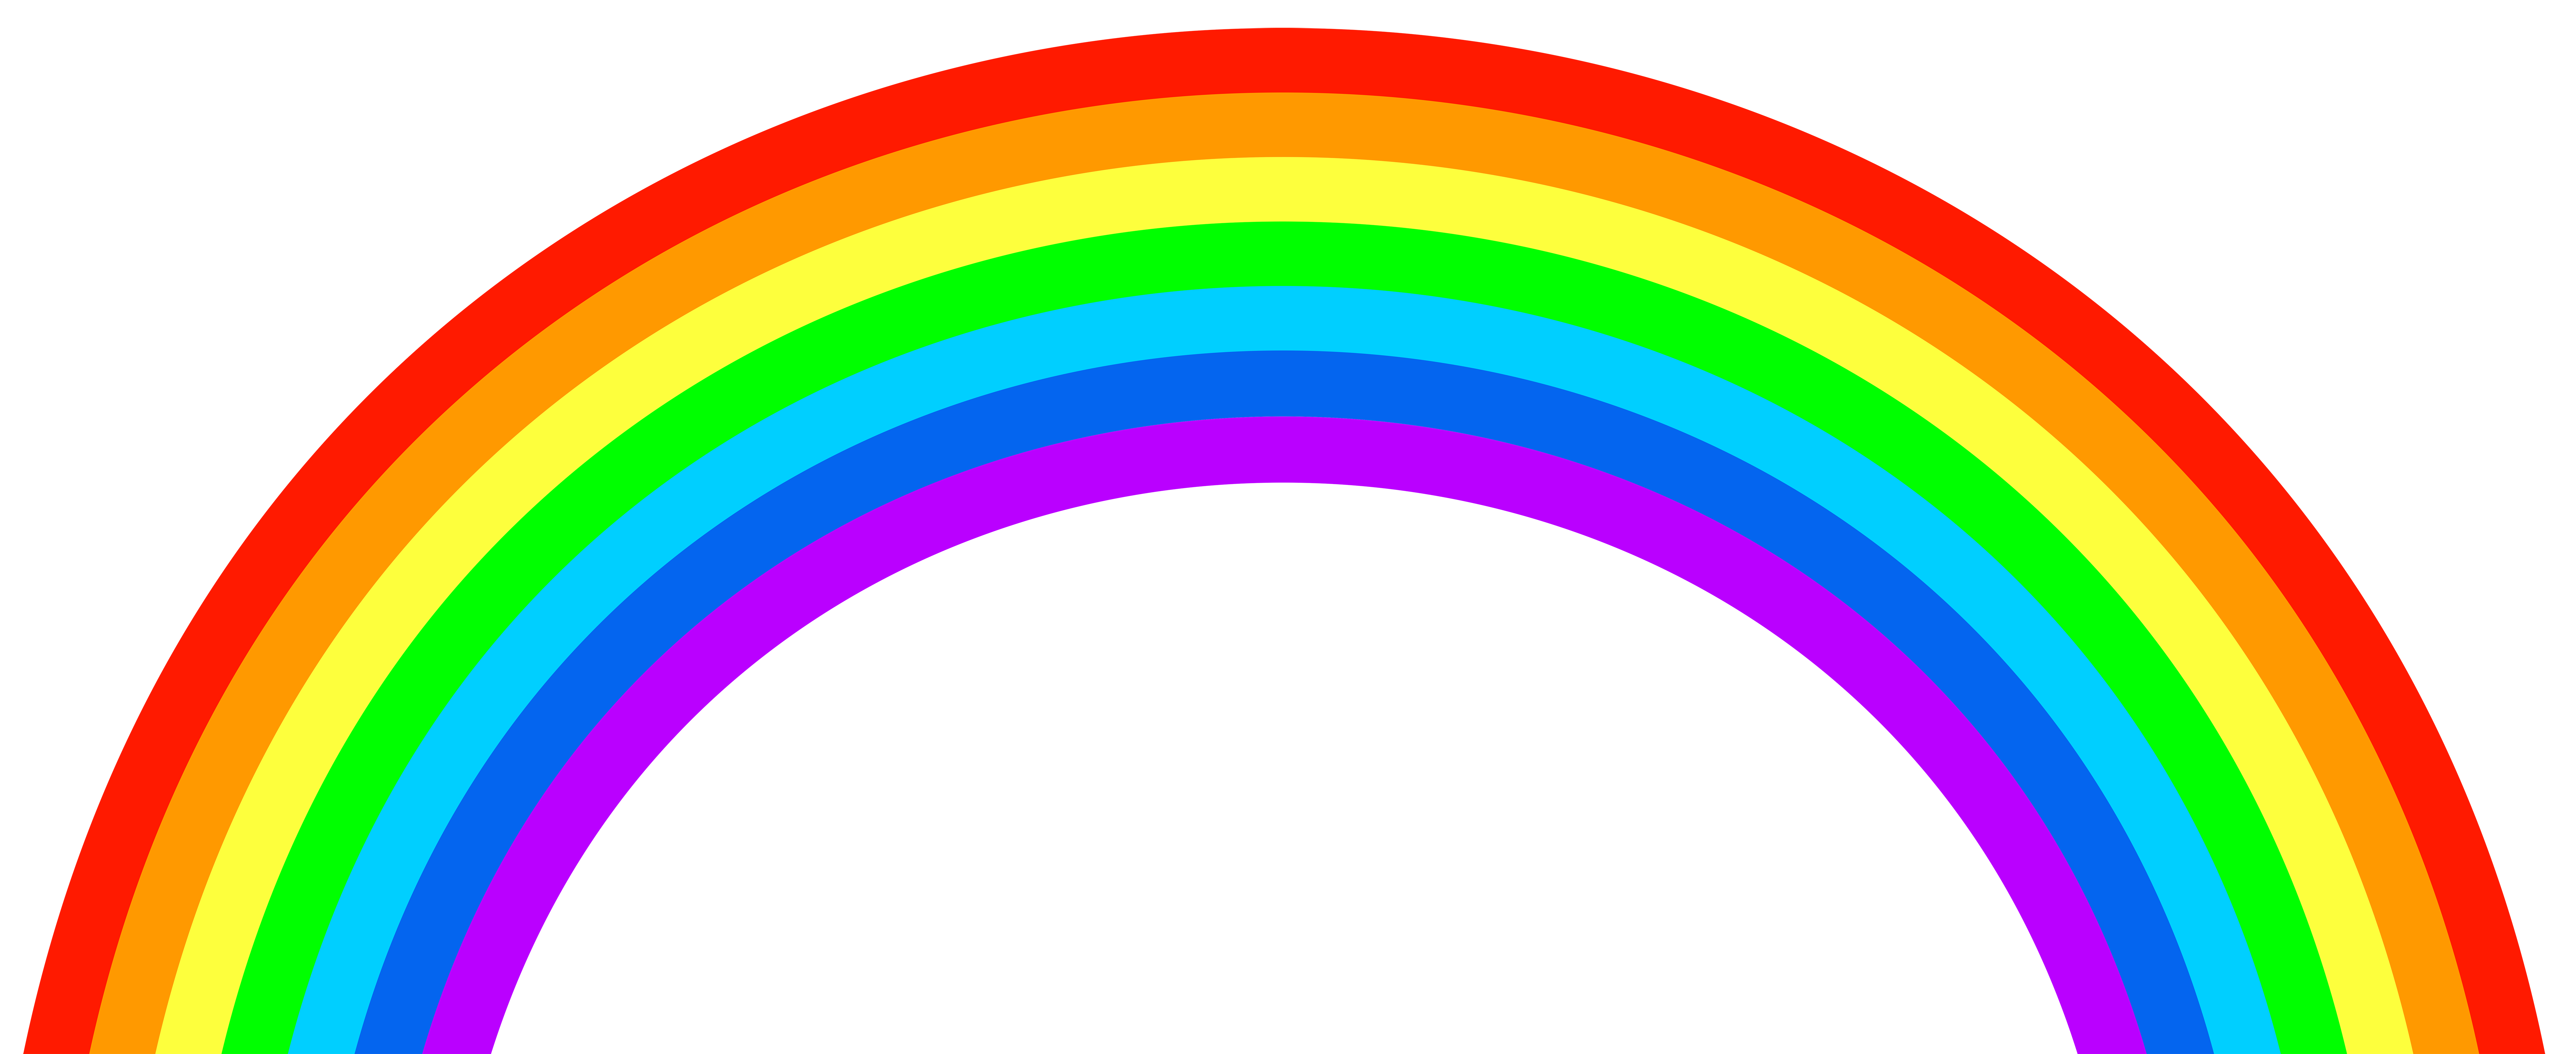 Rainbow Transparent PNG Image | Gallery Yopriceville ...